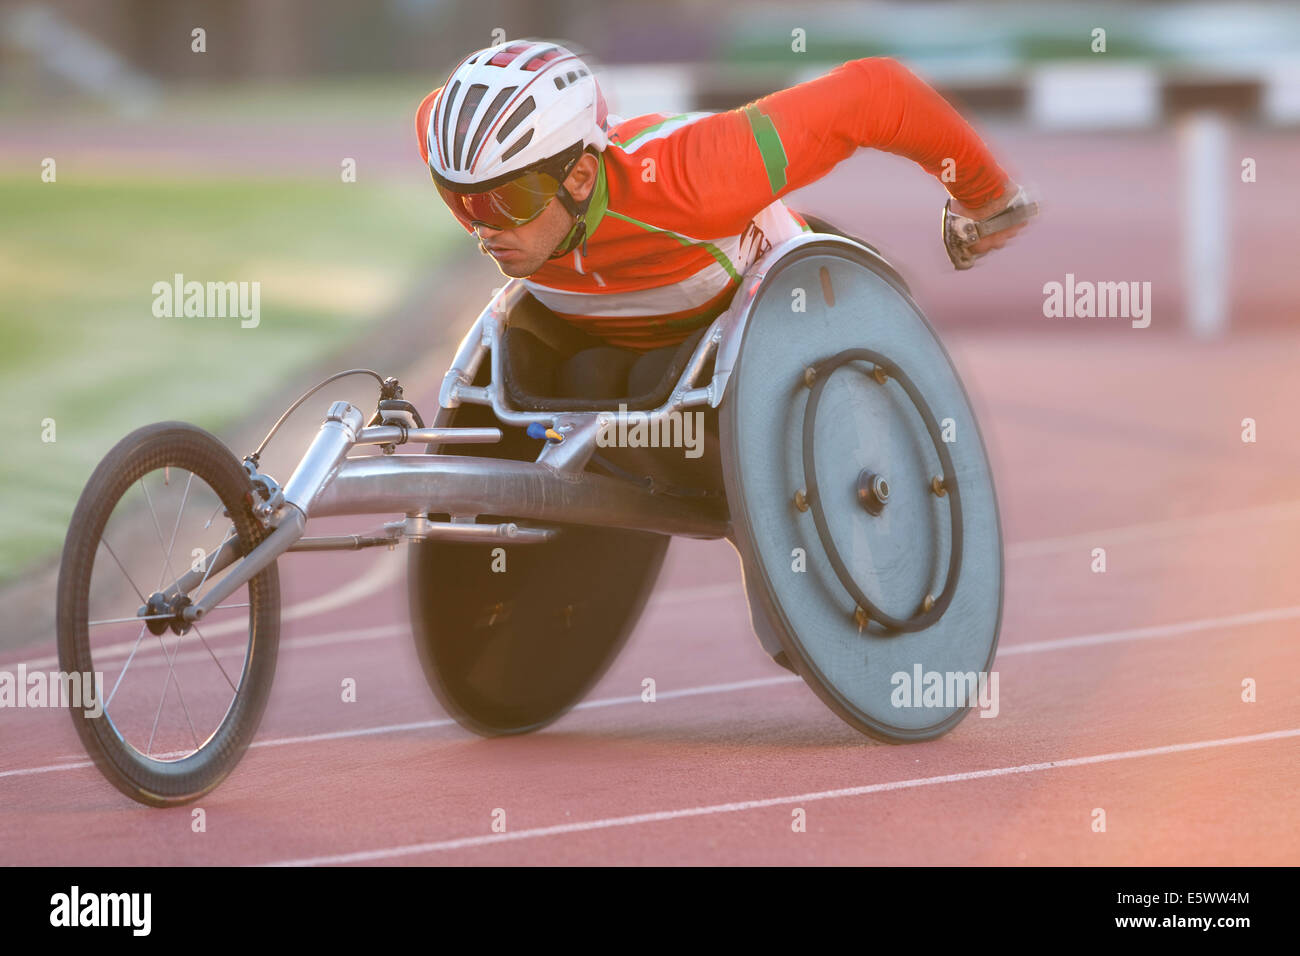 Athlete in para-athletic competition Stock Photo